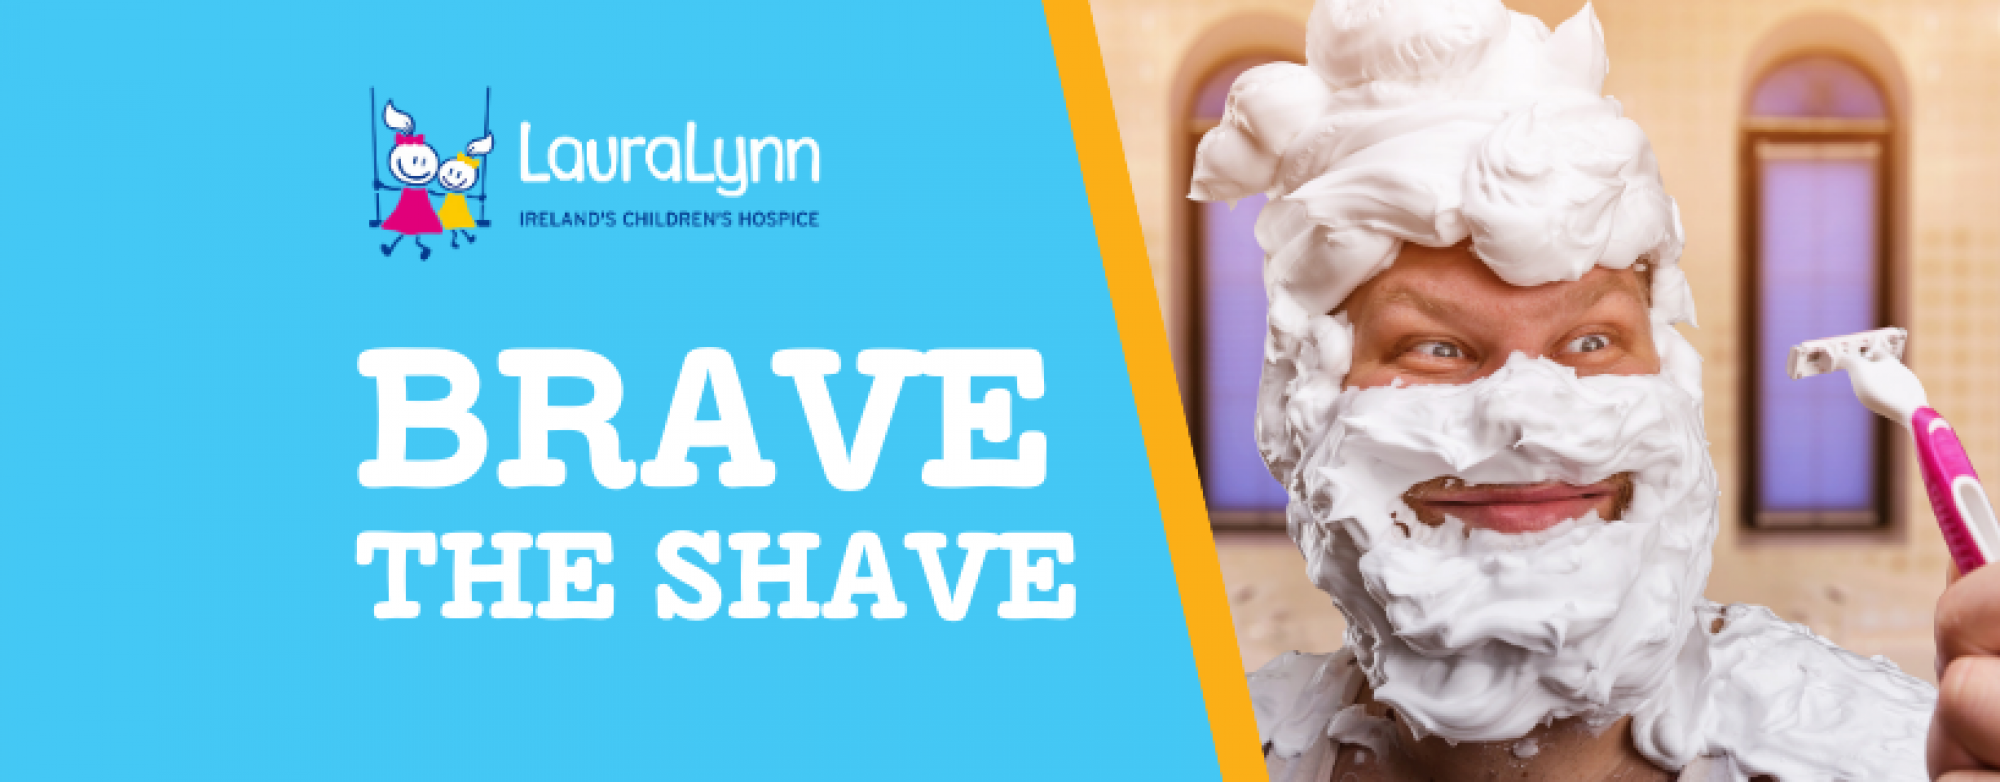 Brave the Shave